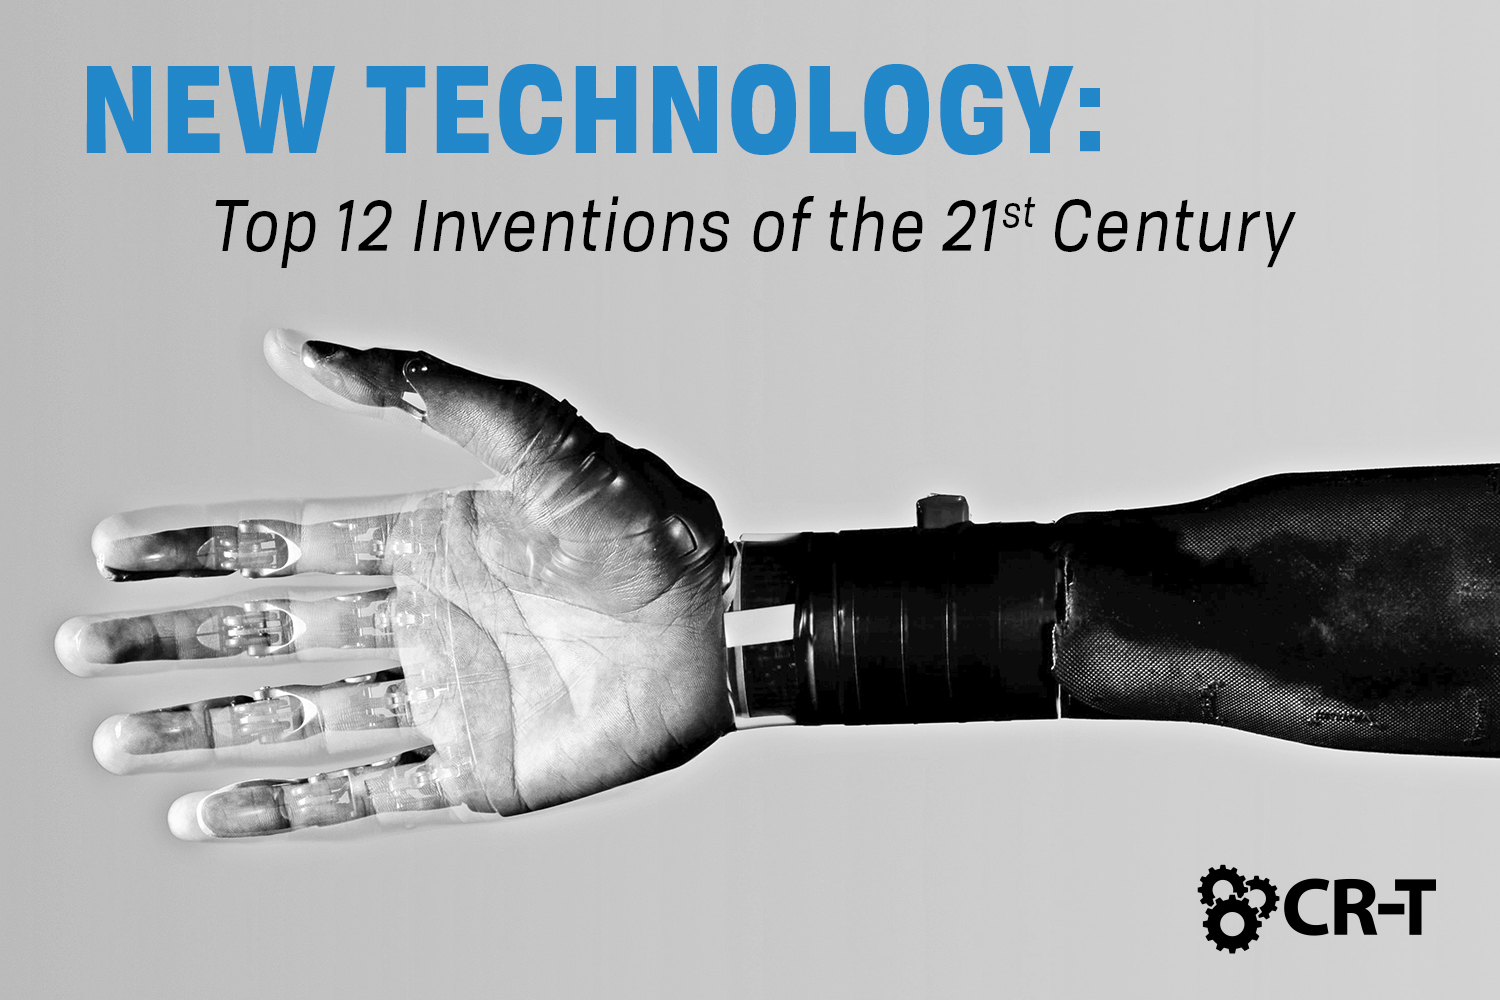 New Technology: Top 12 Inventions of the 21st Century